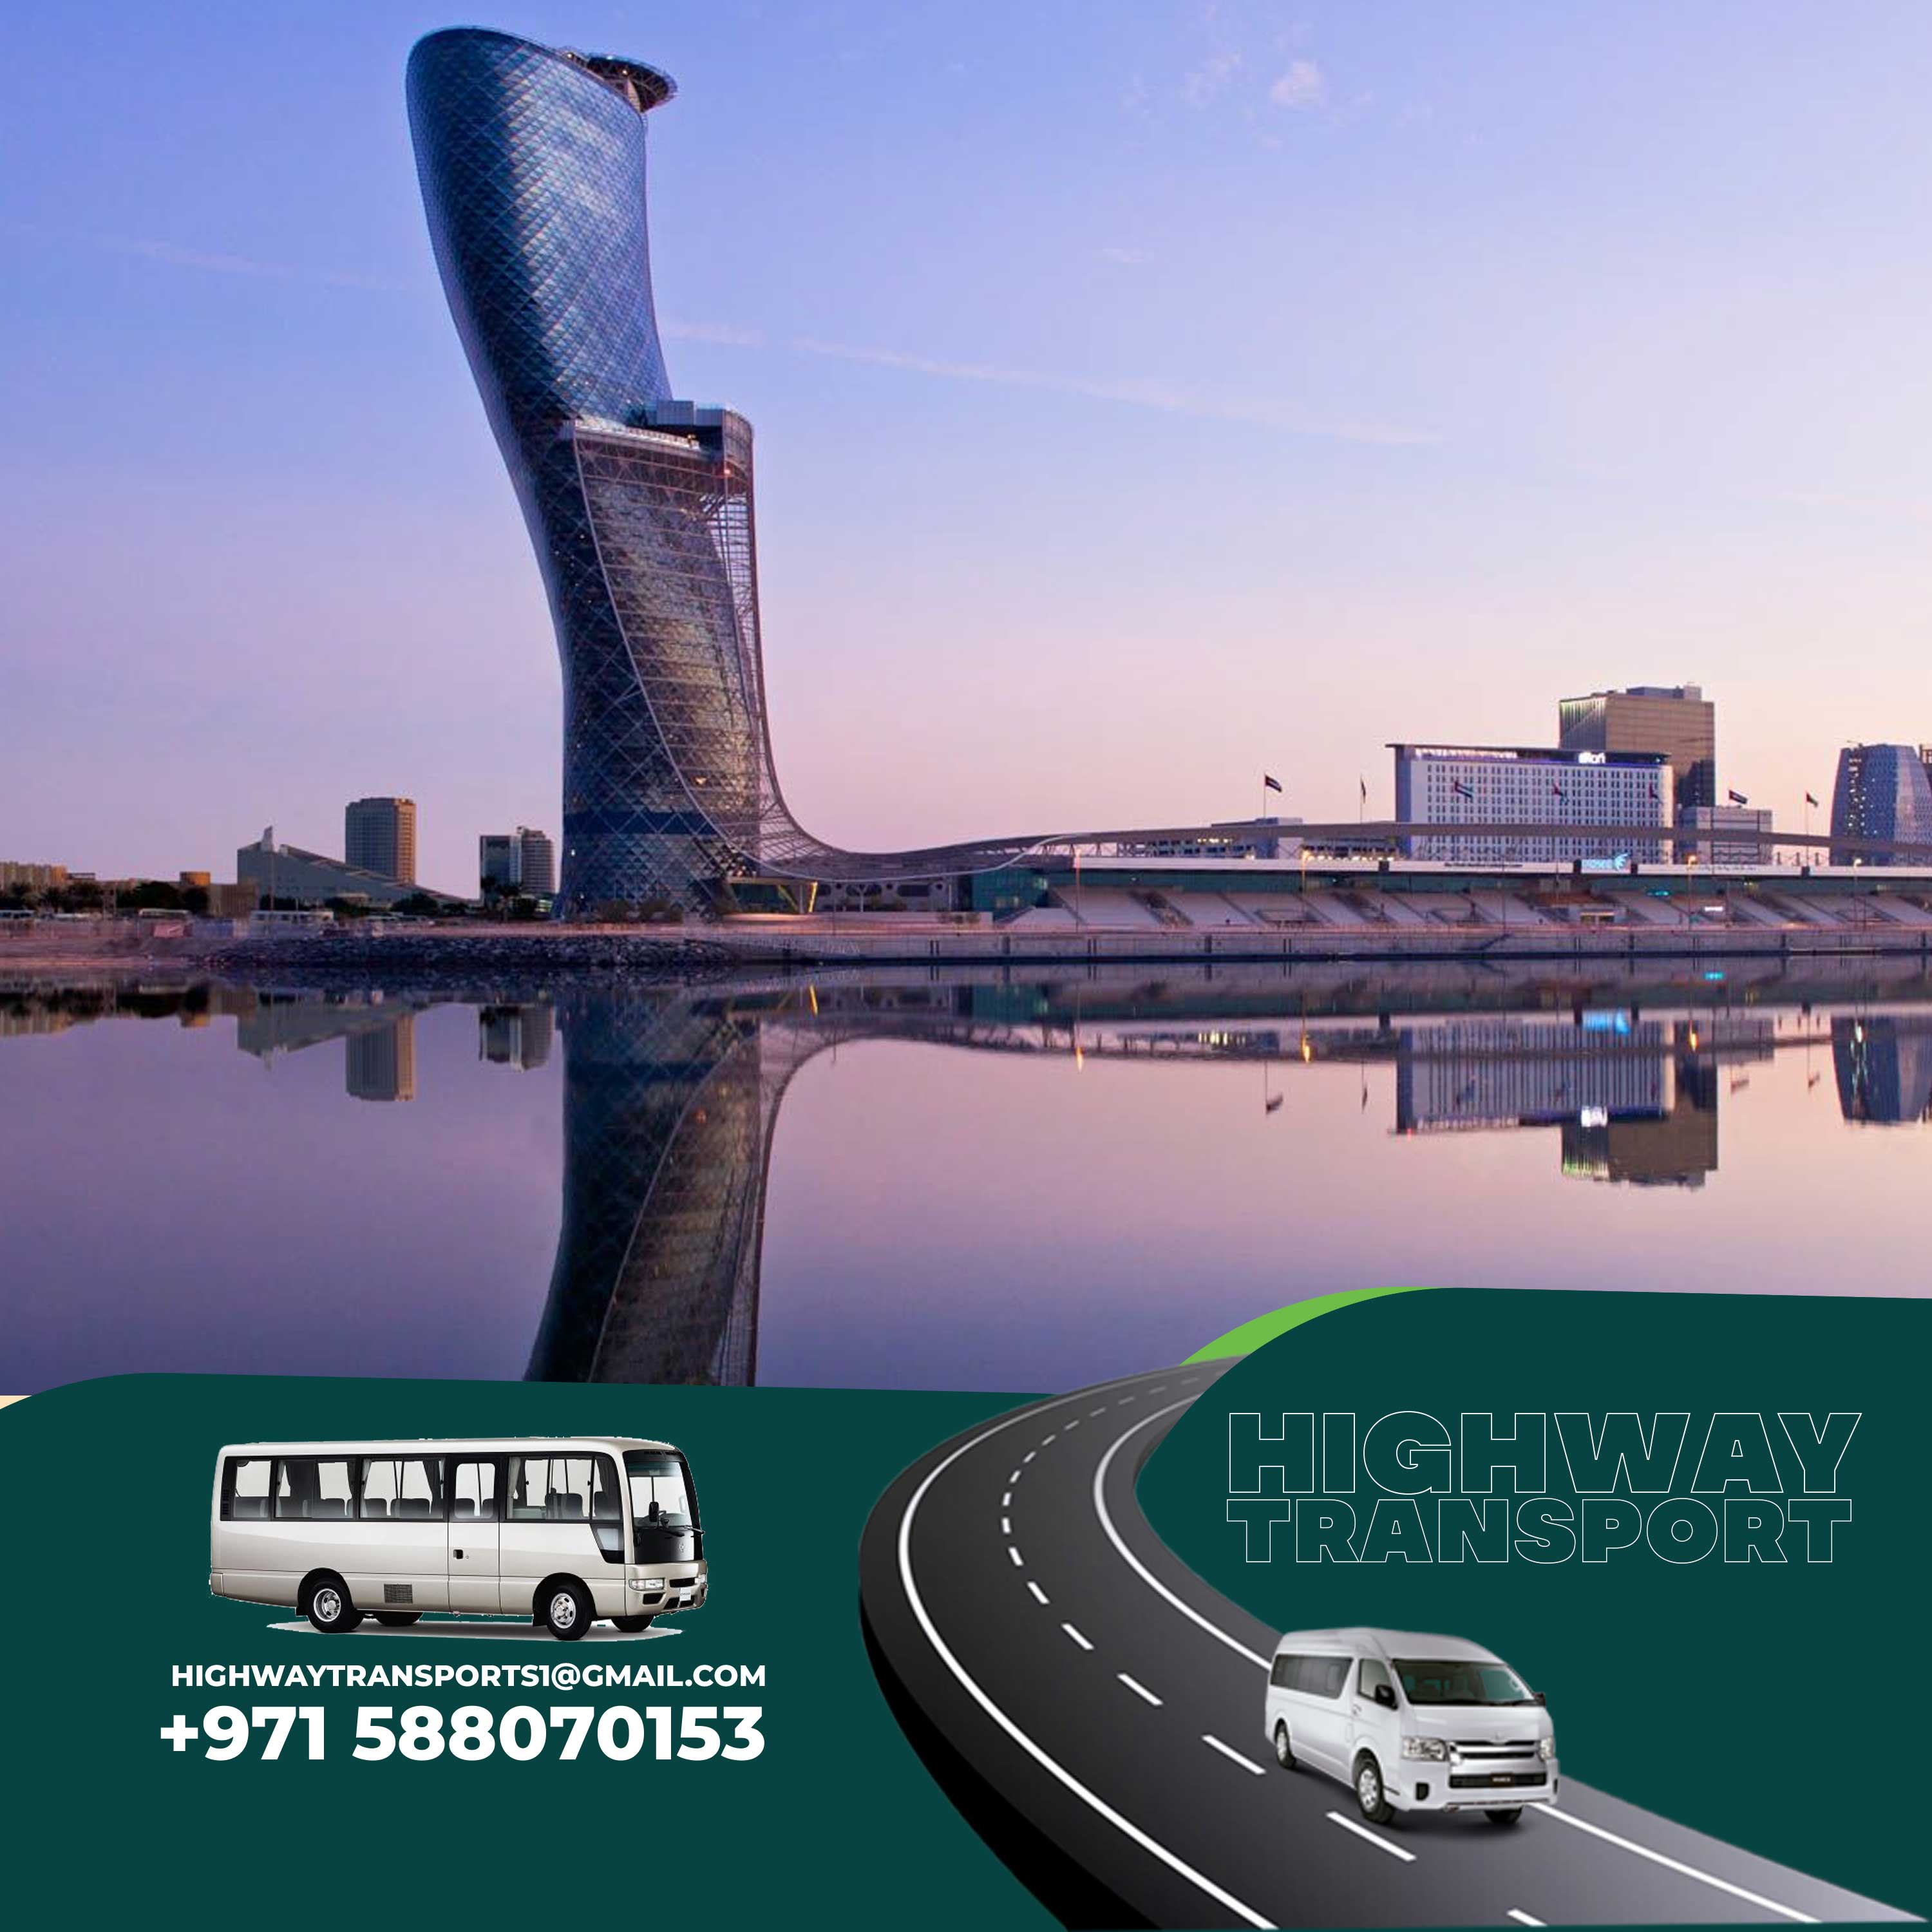 Architectural marvel: Capital Gate leaning structure with modern office spaces and visitor info